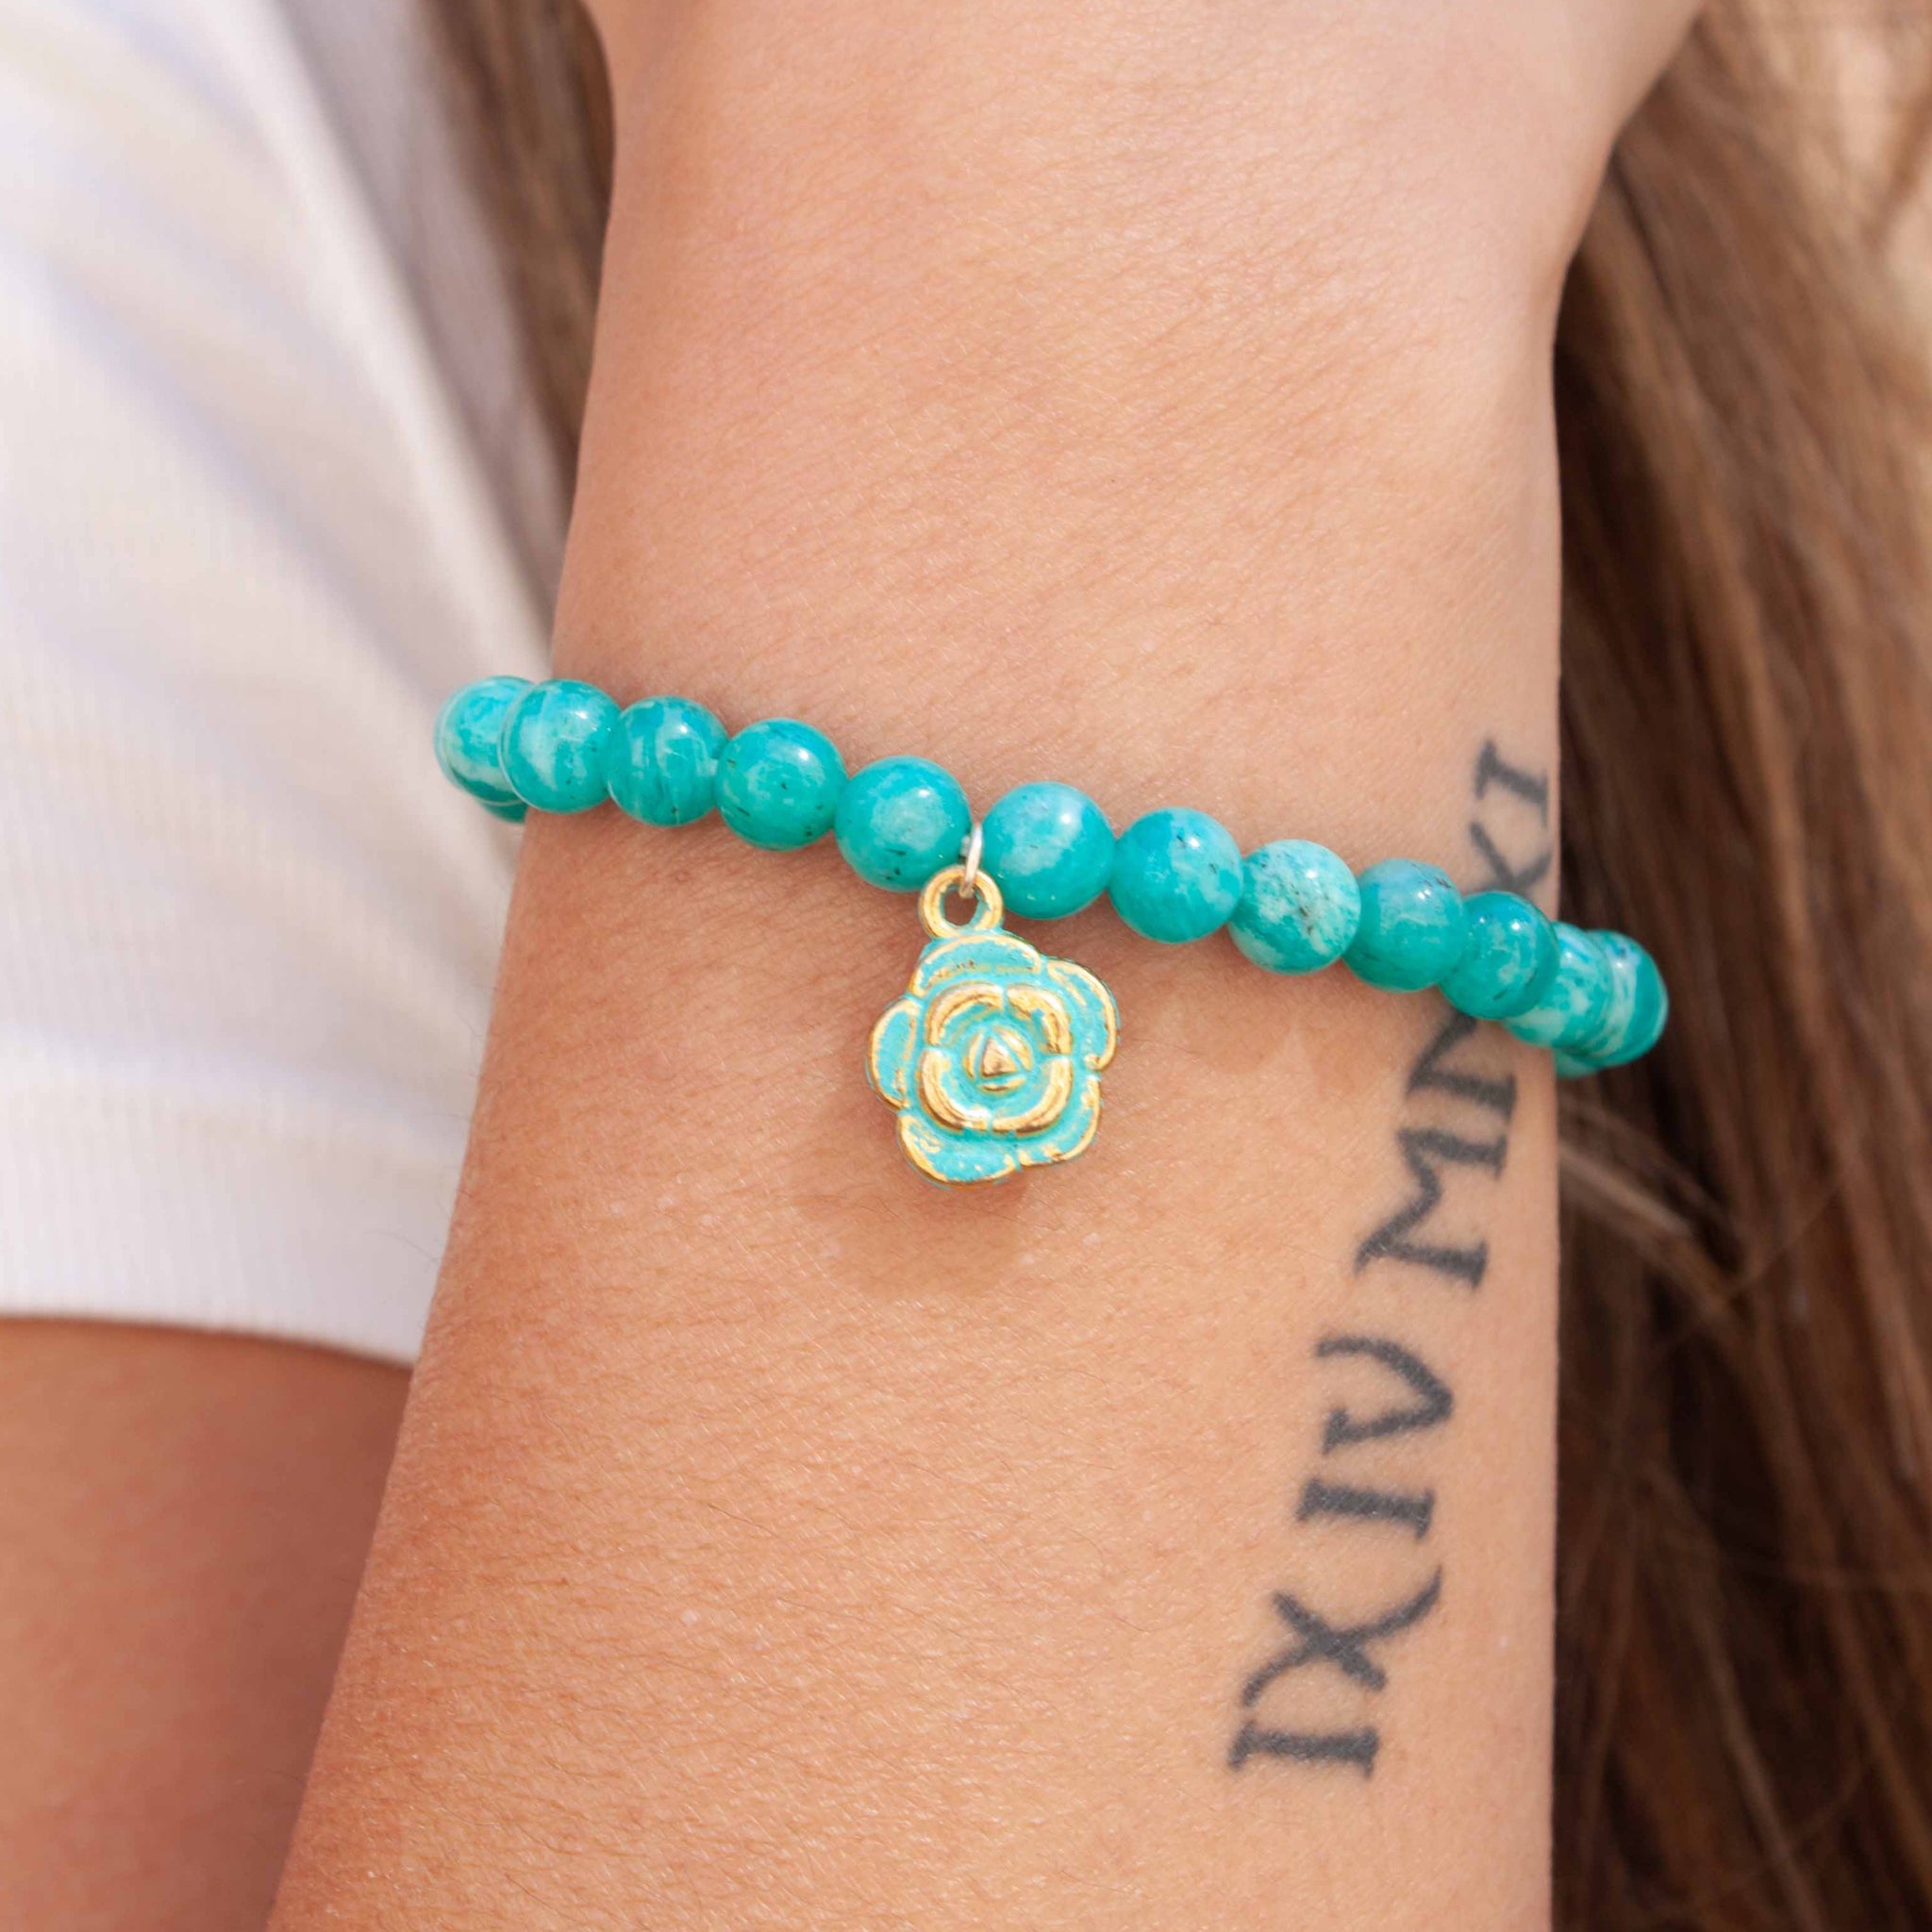 Savour the soothing aqua-green of these Russian amazonite beads and their sweet blue dahlia charm. Punch it up with our 14 karat gold filled bracelet! 7" russian amazonite bracelet and gold plated dahlia charm, 14 kt gold filled stacking bracelet double strung with silk elastic. Handmade in Toronto by kp jewelry co. 